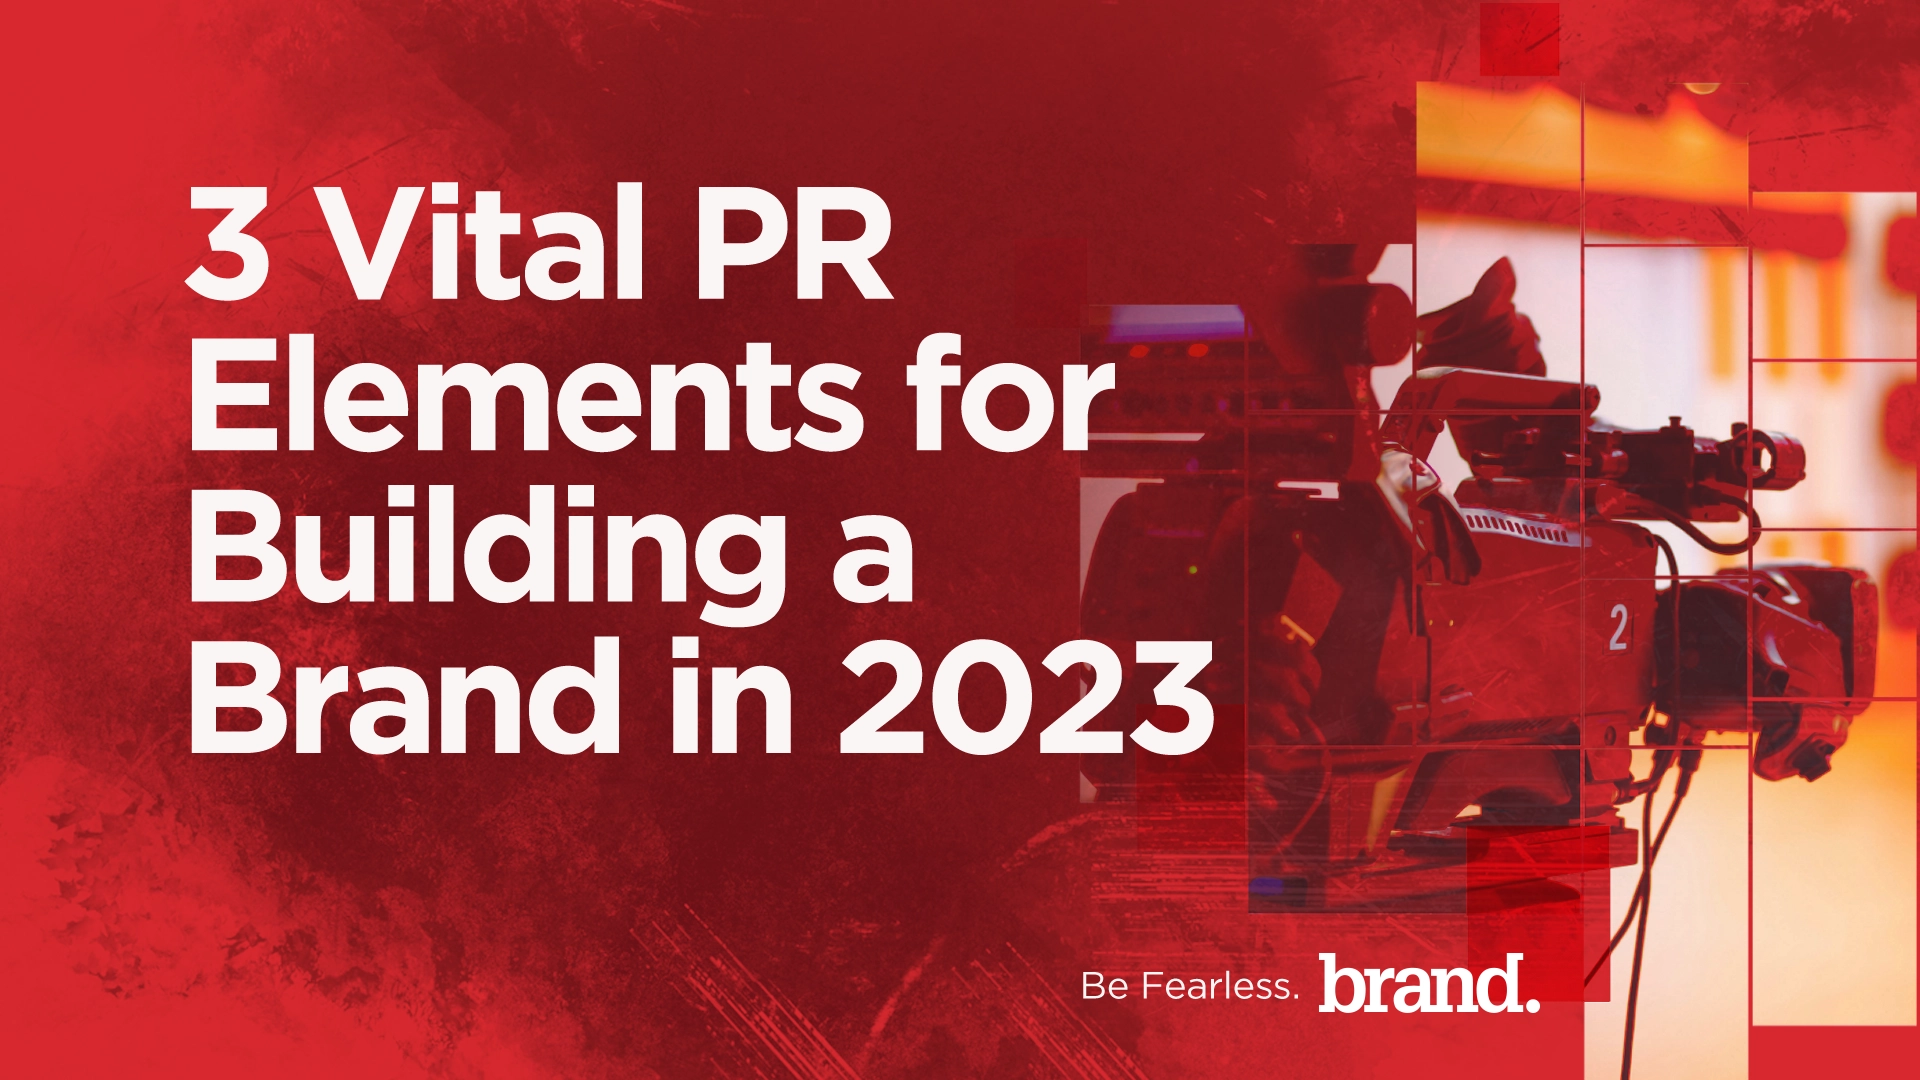 3 Vital PR Elements for Building a Brand in 2023